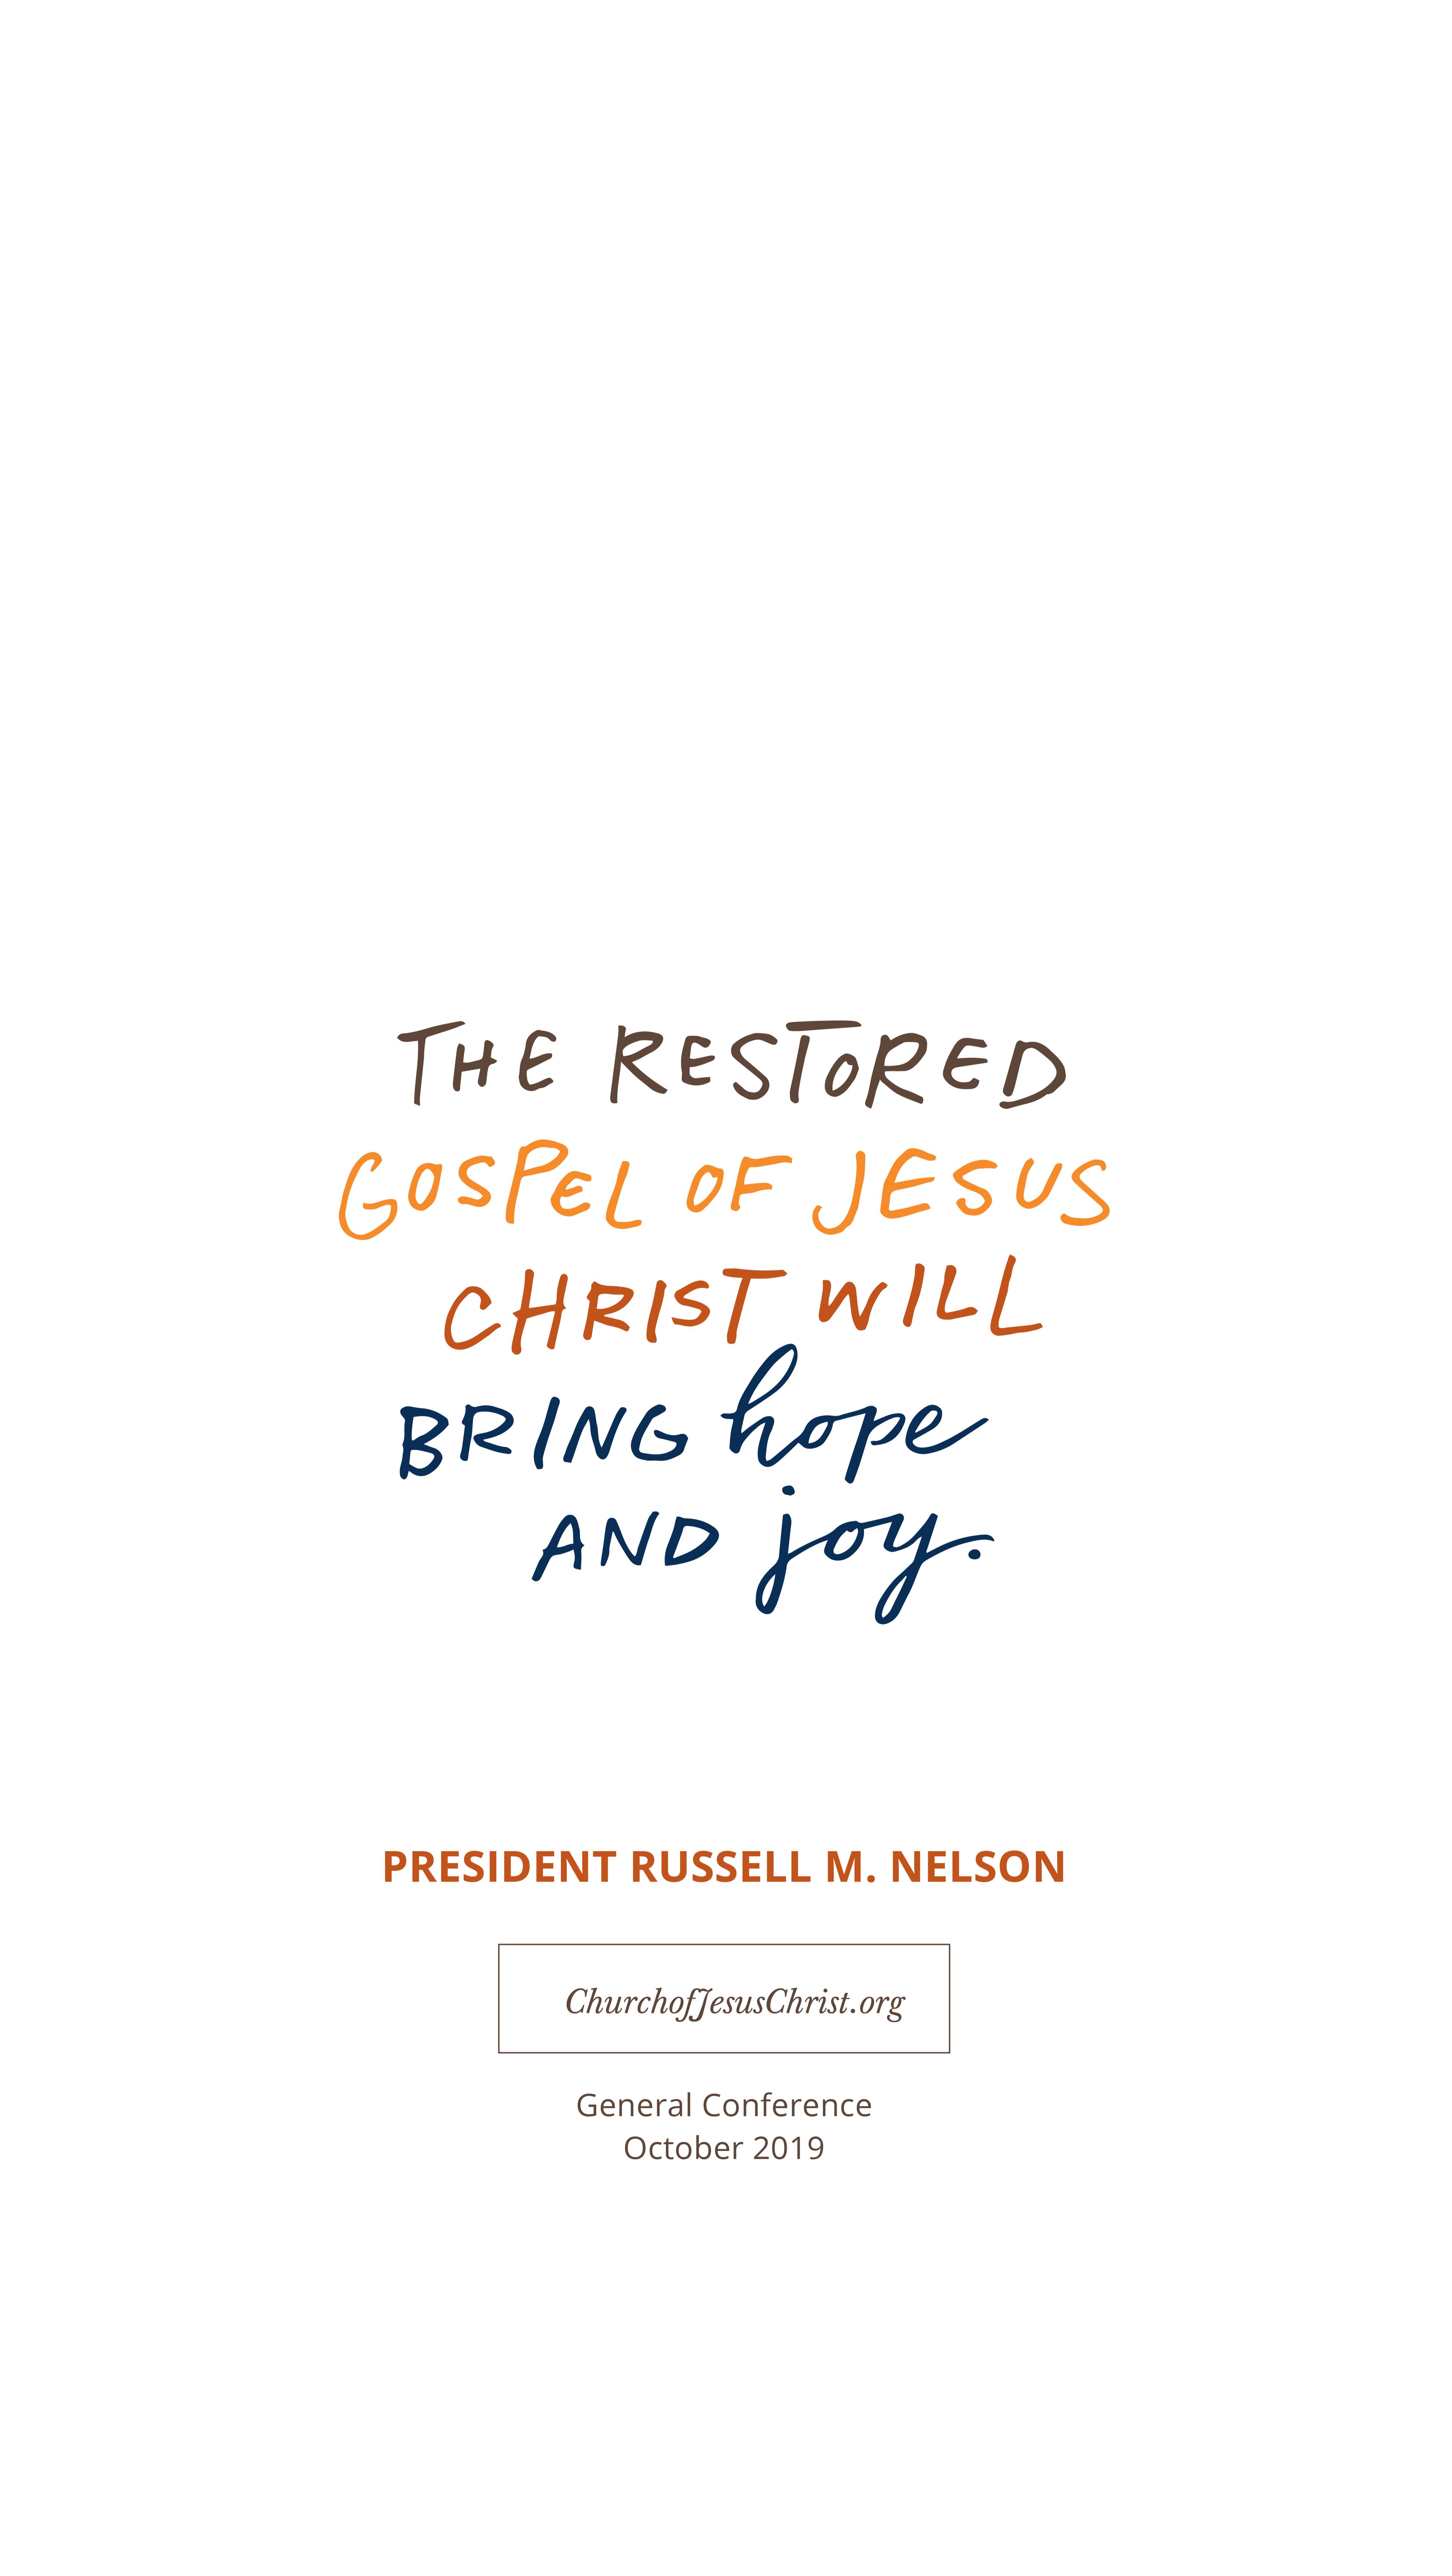 "The Restored Gospel of Jesus Christ will bring hope and joy."—Russell M. Nelson